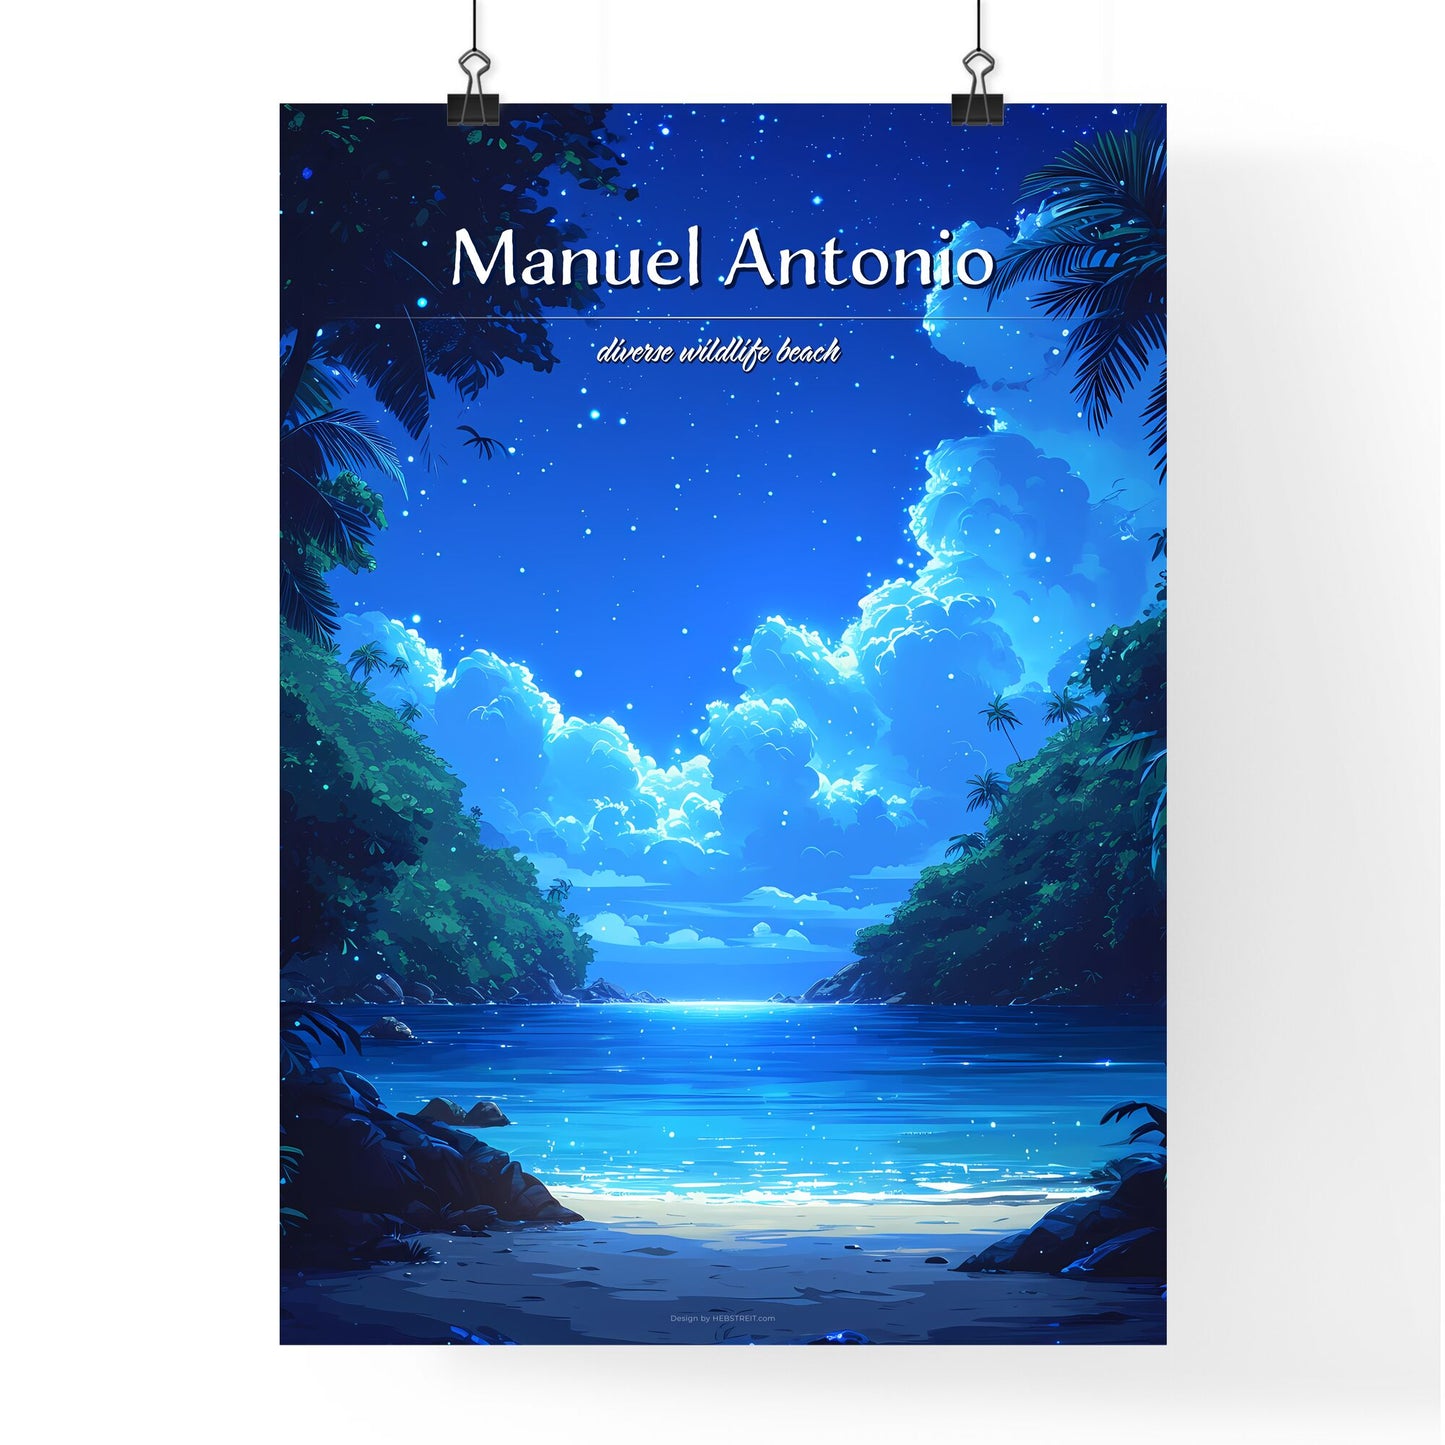 Manuel Antonio Beach - Art print of a blue sky with clouds and a body of water Default Title